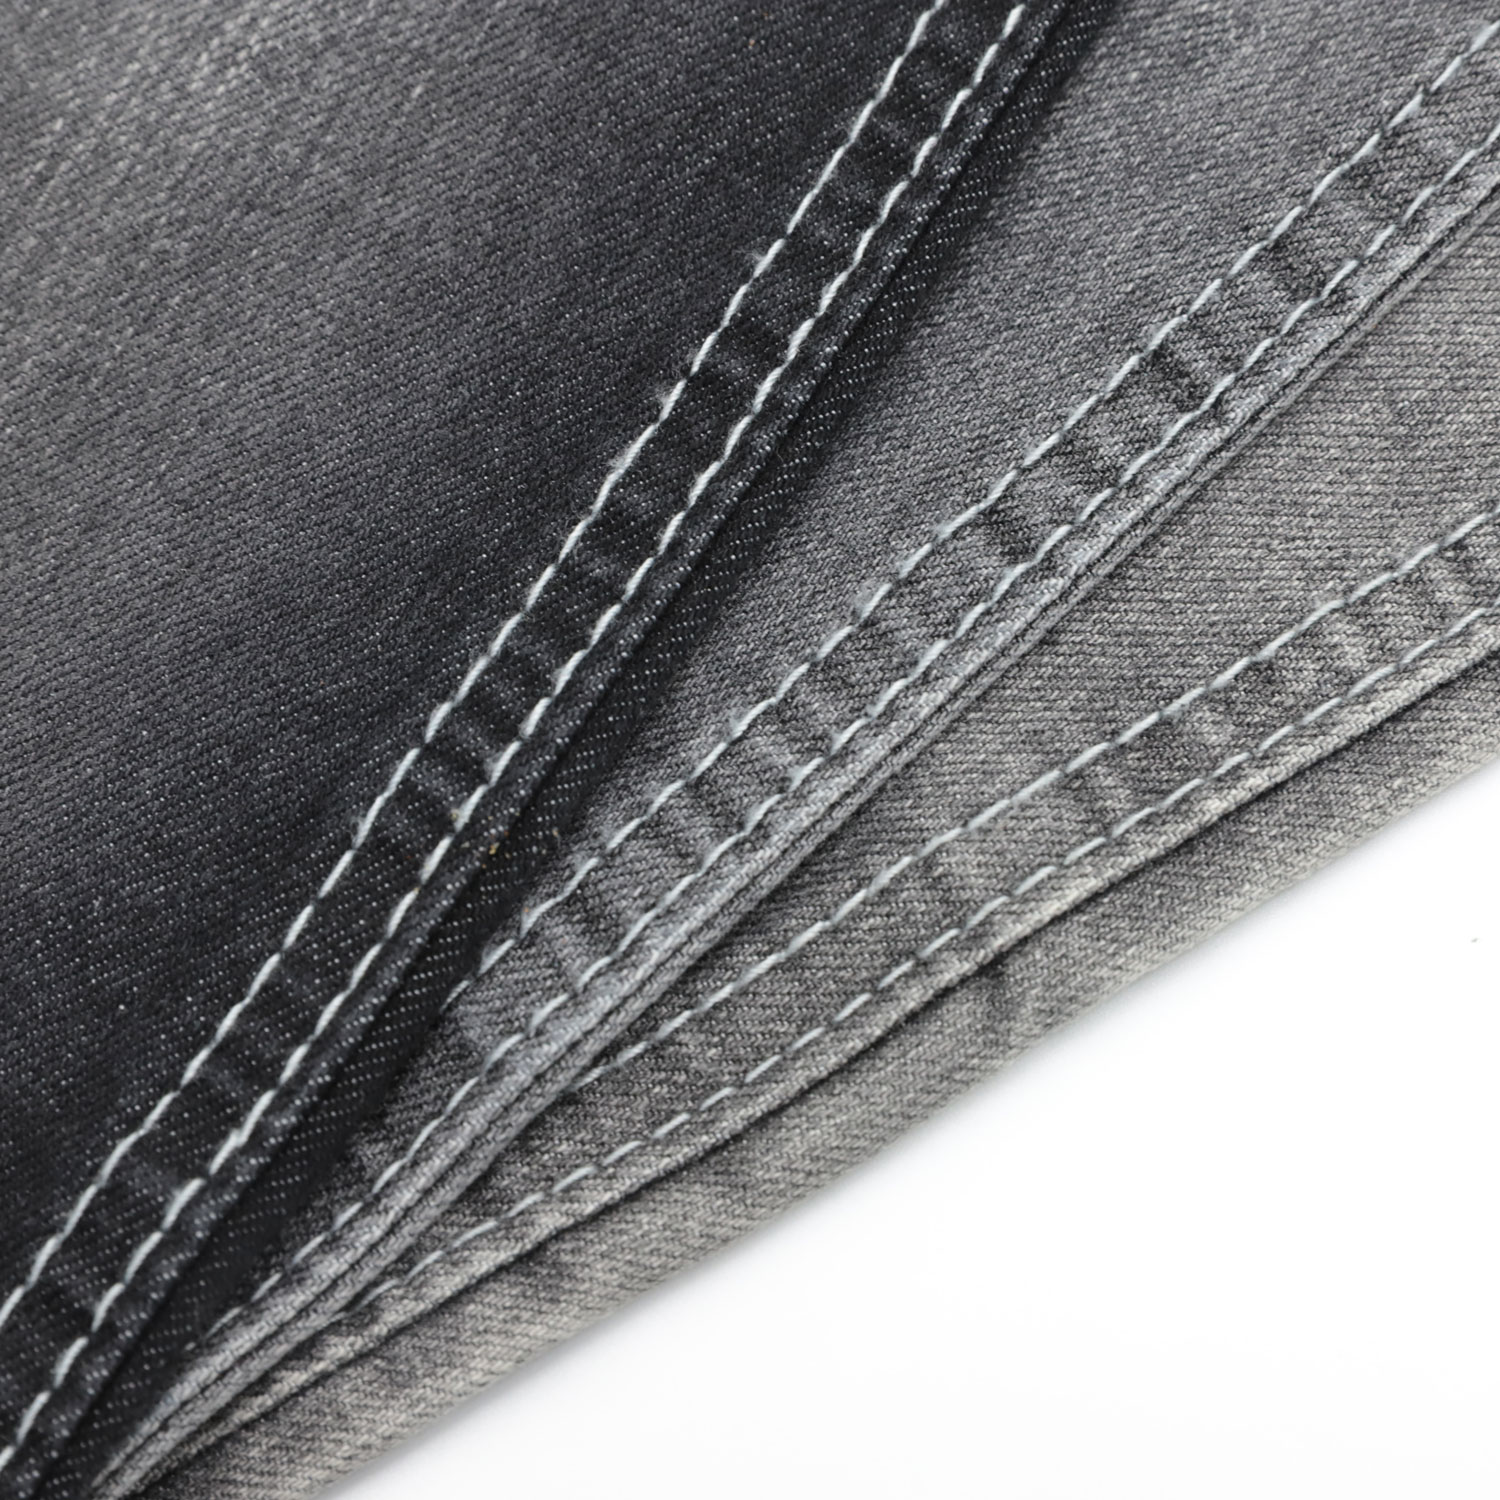 How to Sew Your Own Soft Denim Fabric From Old Jeans 2